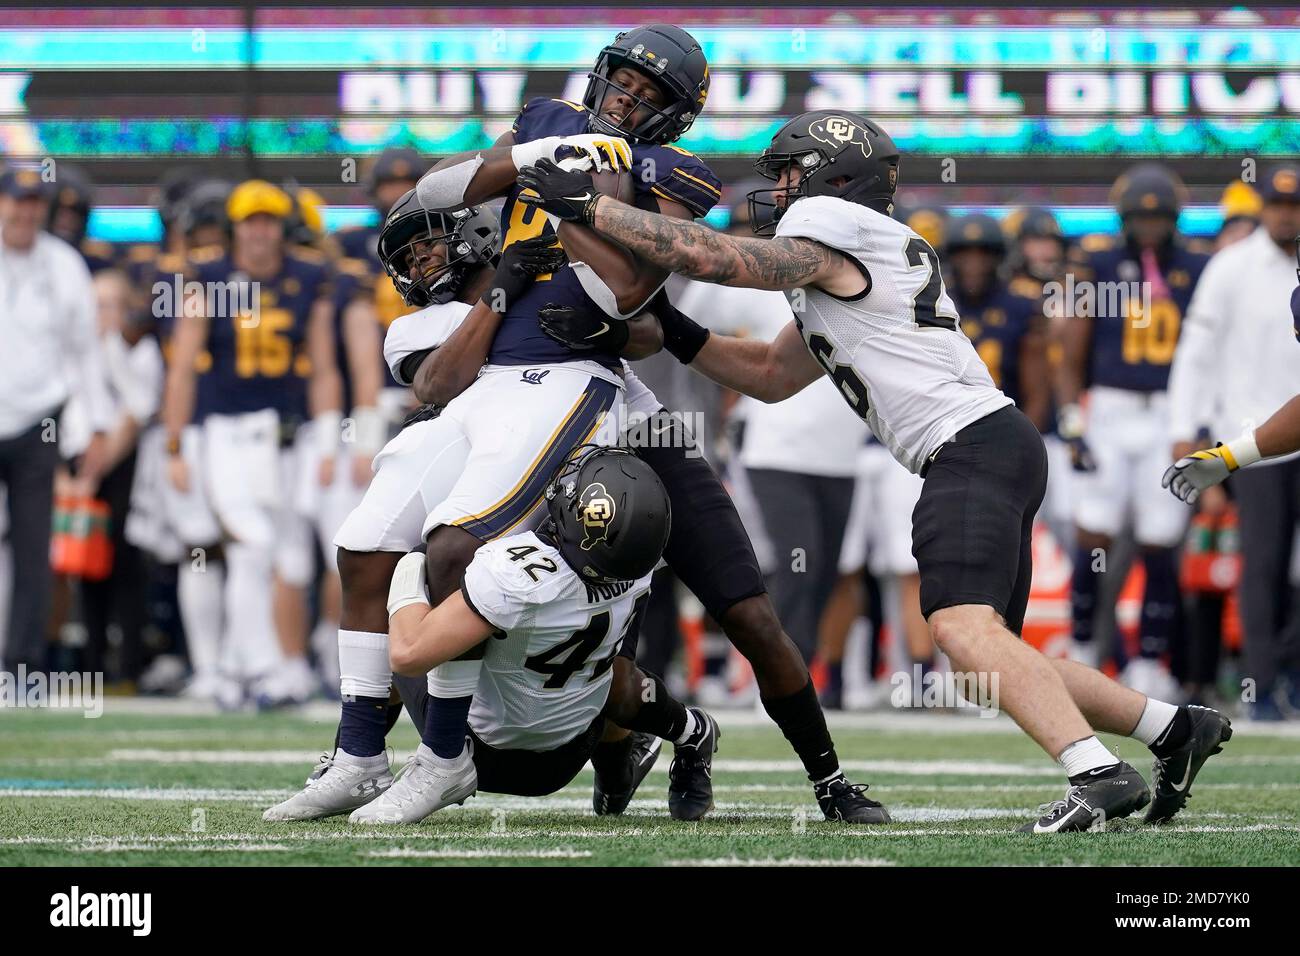 California tight end Jermaine Terry II, center, is tackled by